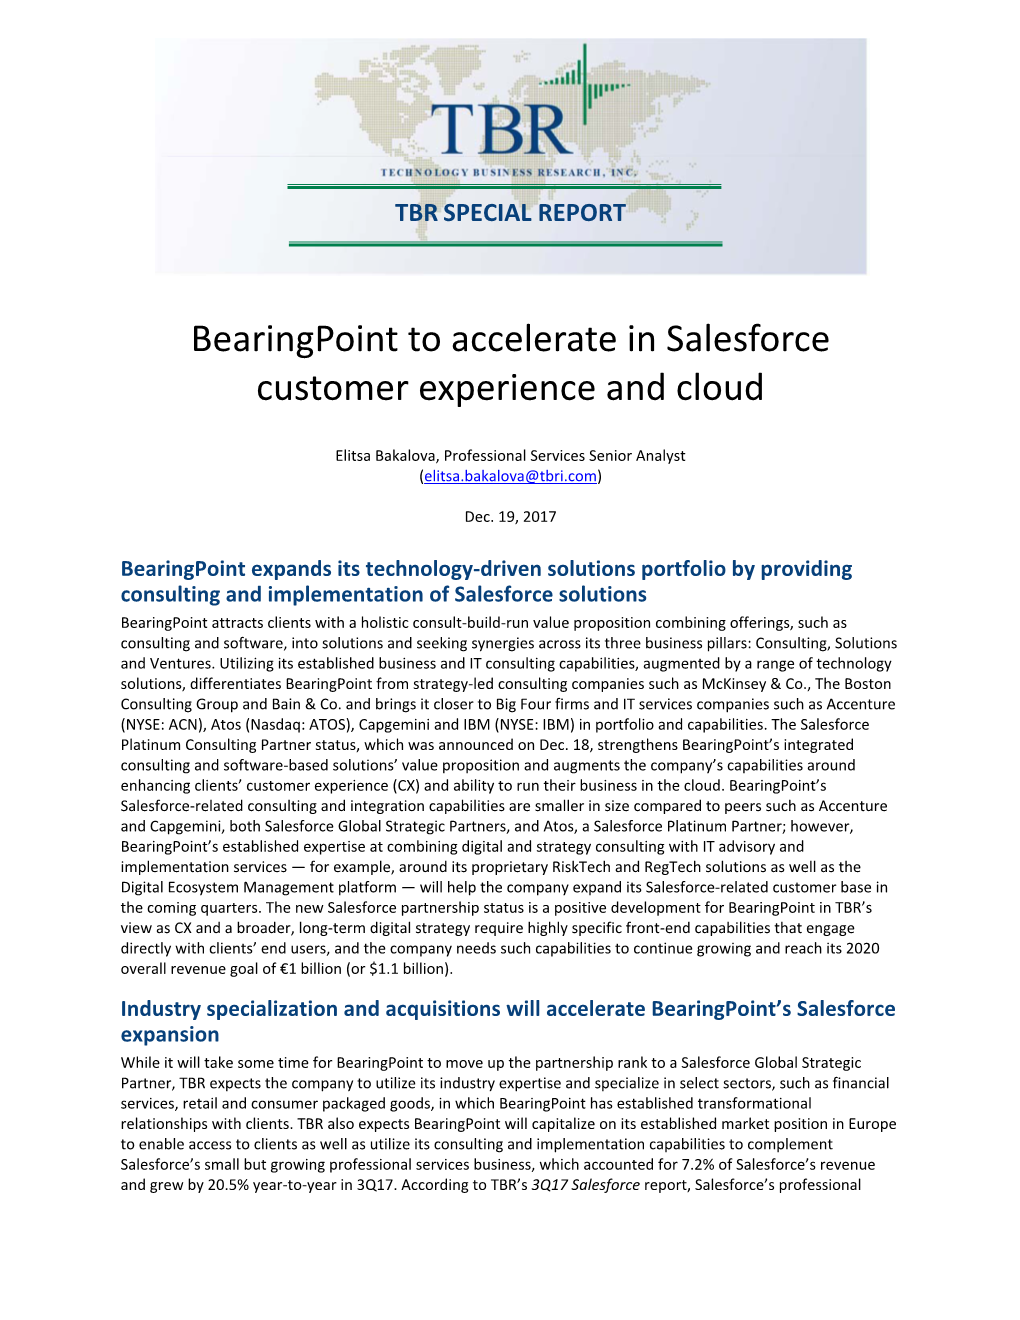 Bearingpoint to Accelerate in Salesforce Customer Experience and Cloud